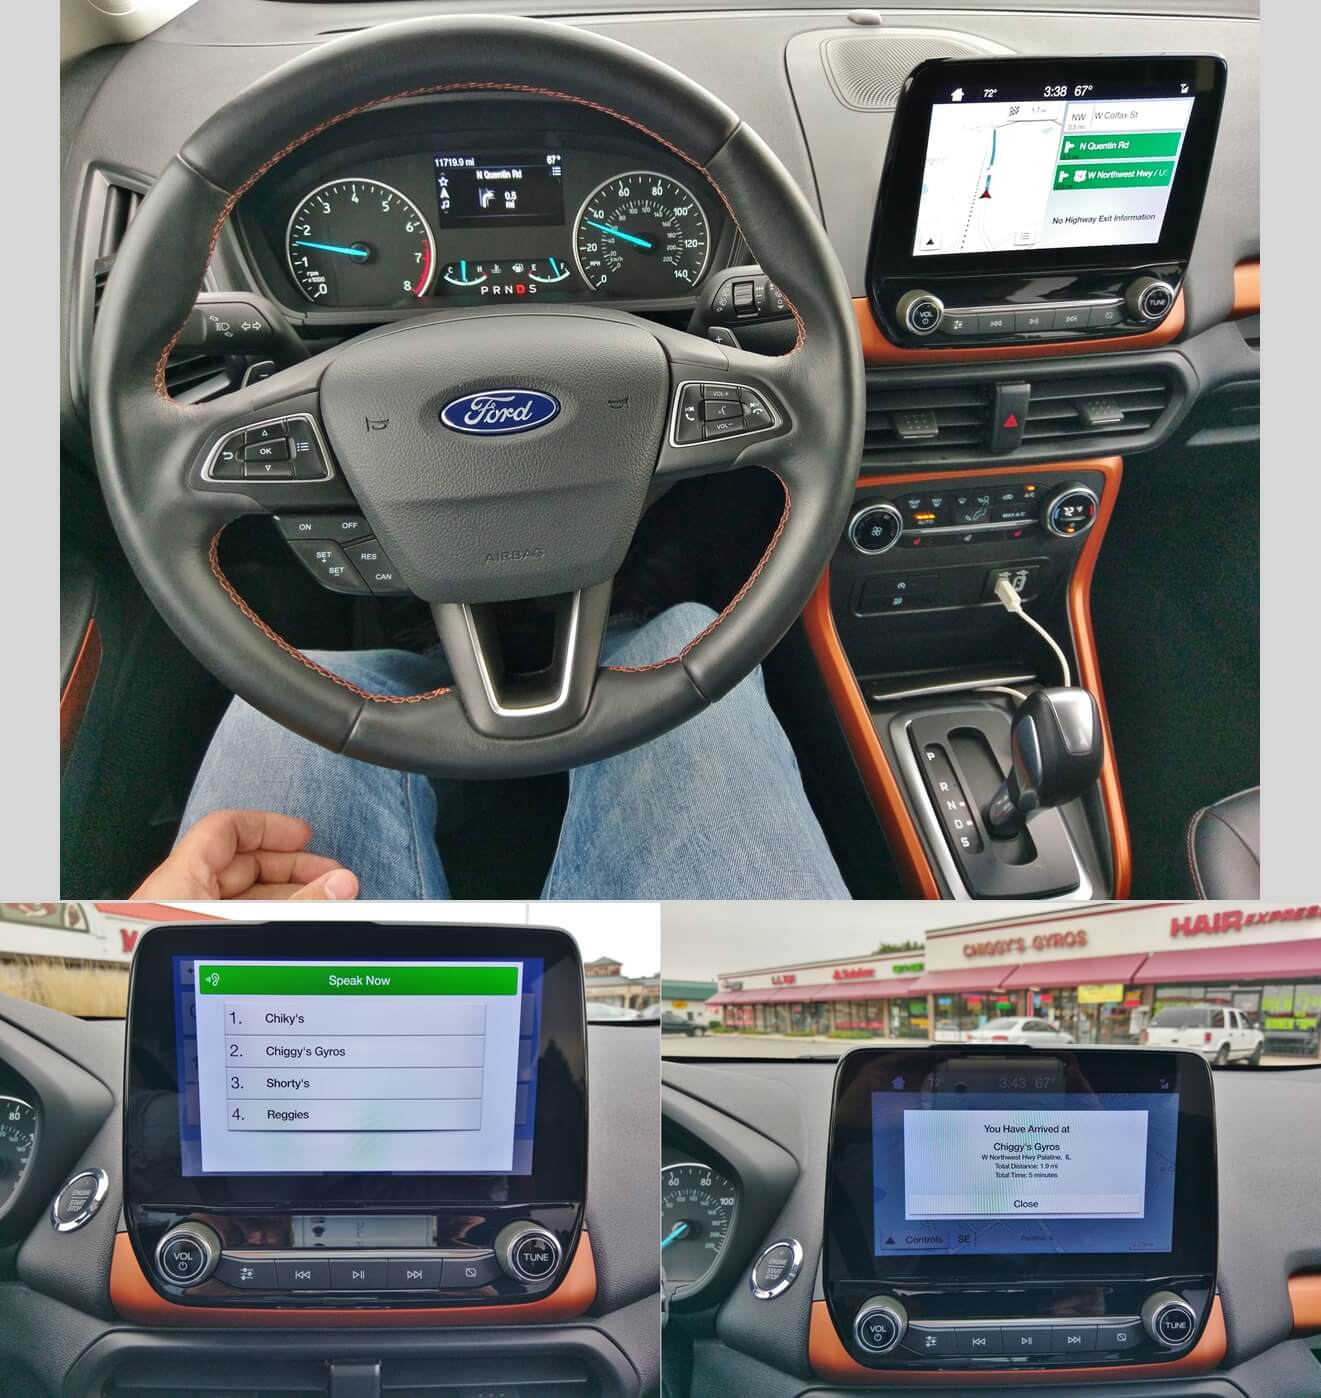 2018 Ford EcoSport SES 4WD: Versatile and accurate Sync3 on-board voice command GPS turn-by-turn direction Navigation